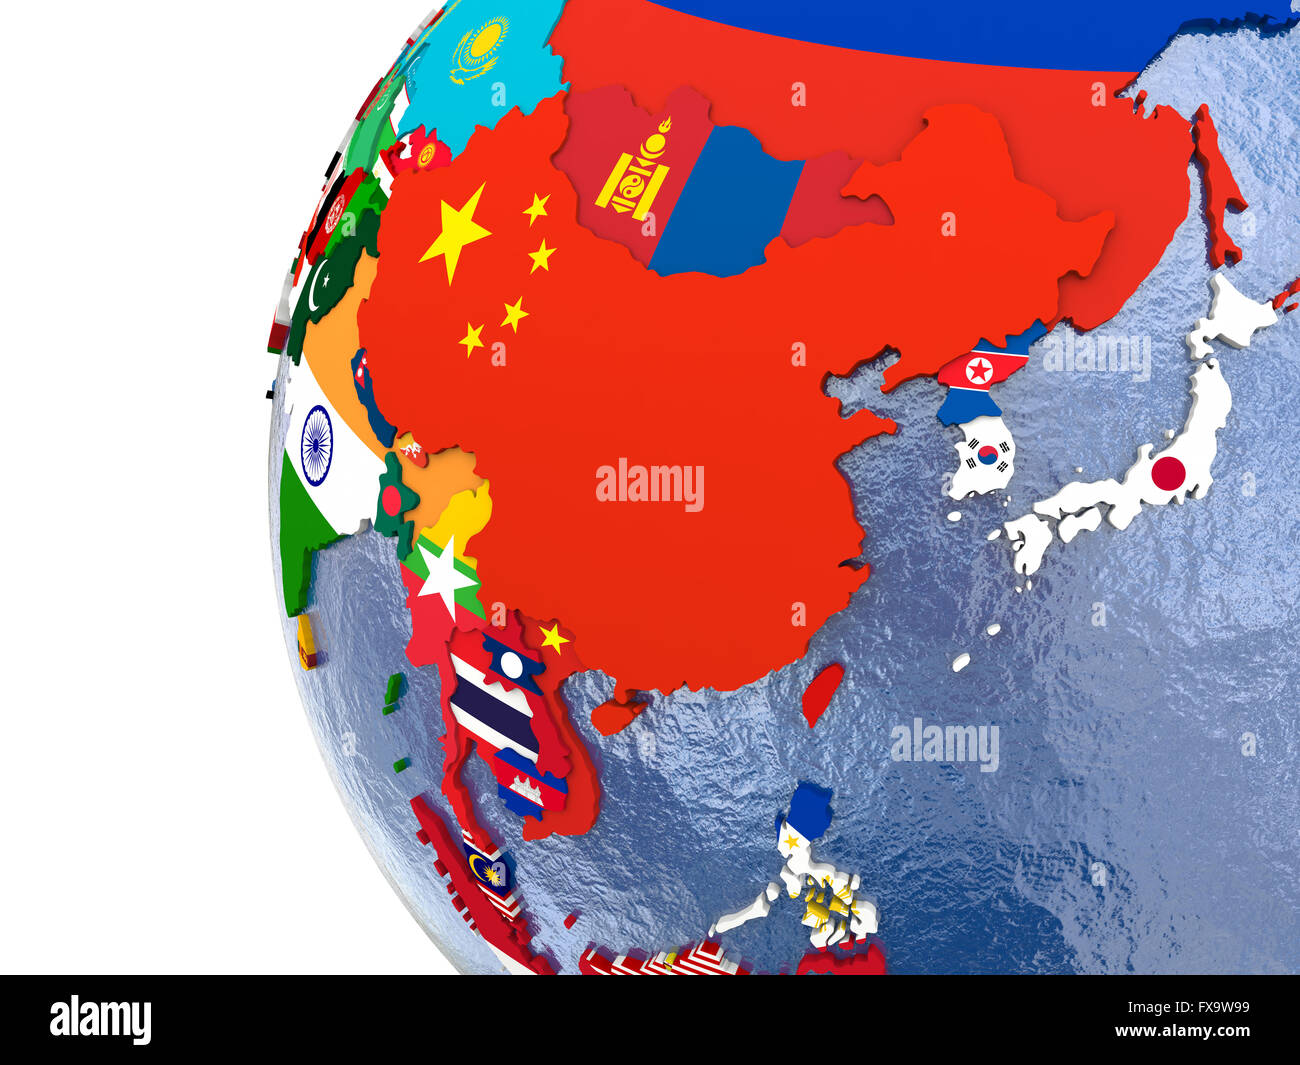 Political Map Of East Asia With Each Country Represented By Its National Flag Stock Photo - Alamy